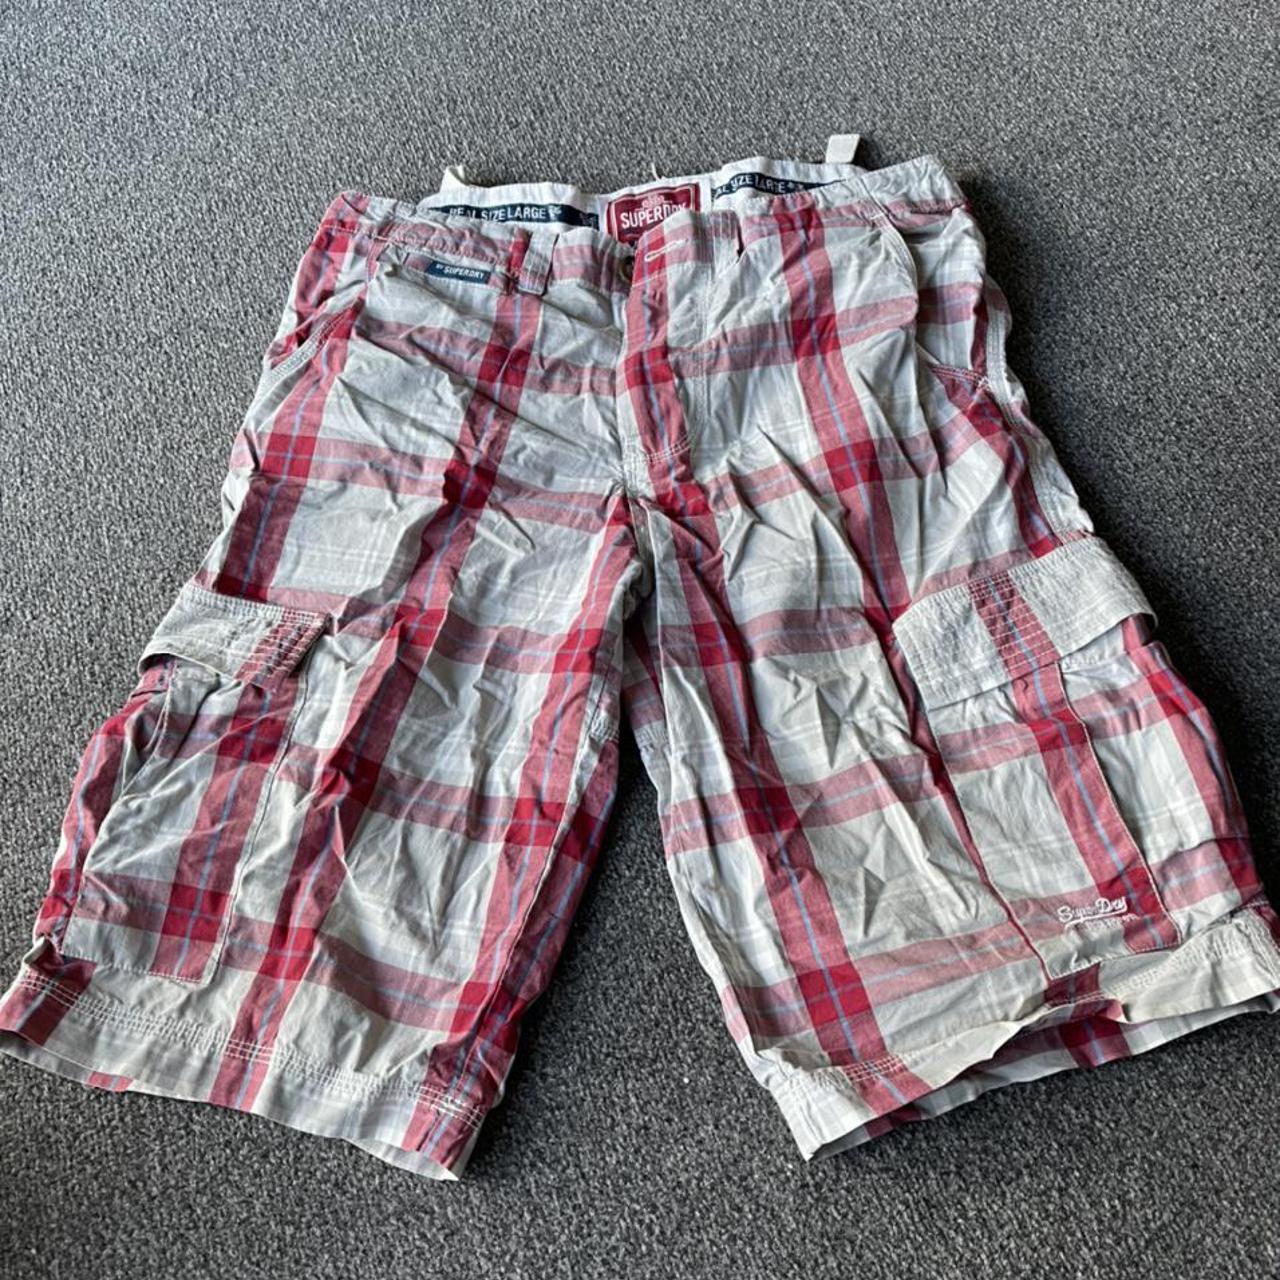 Product Image 1 - Men’s Superdry red and grey